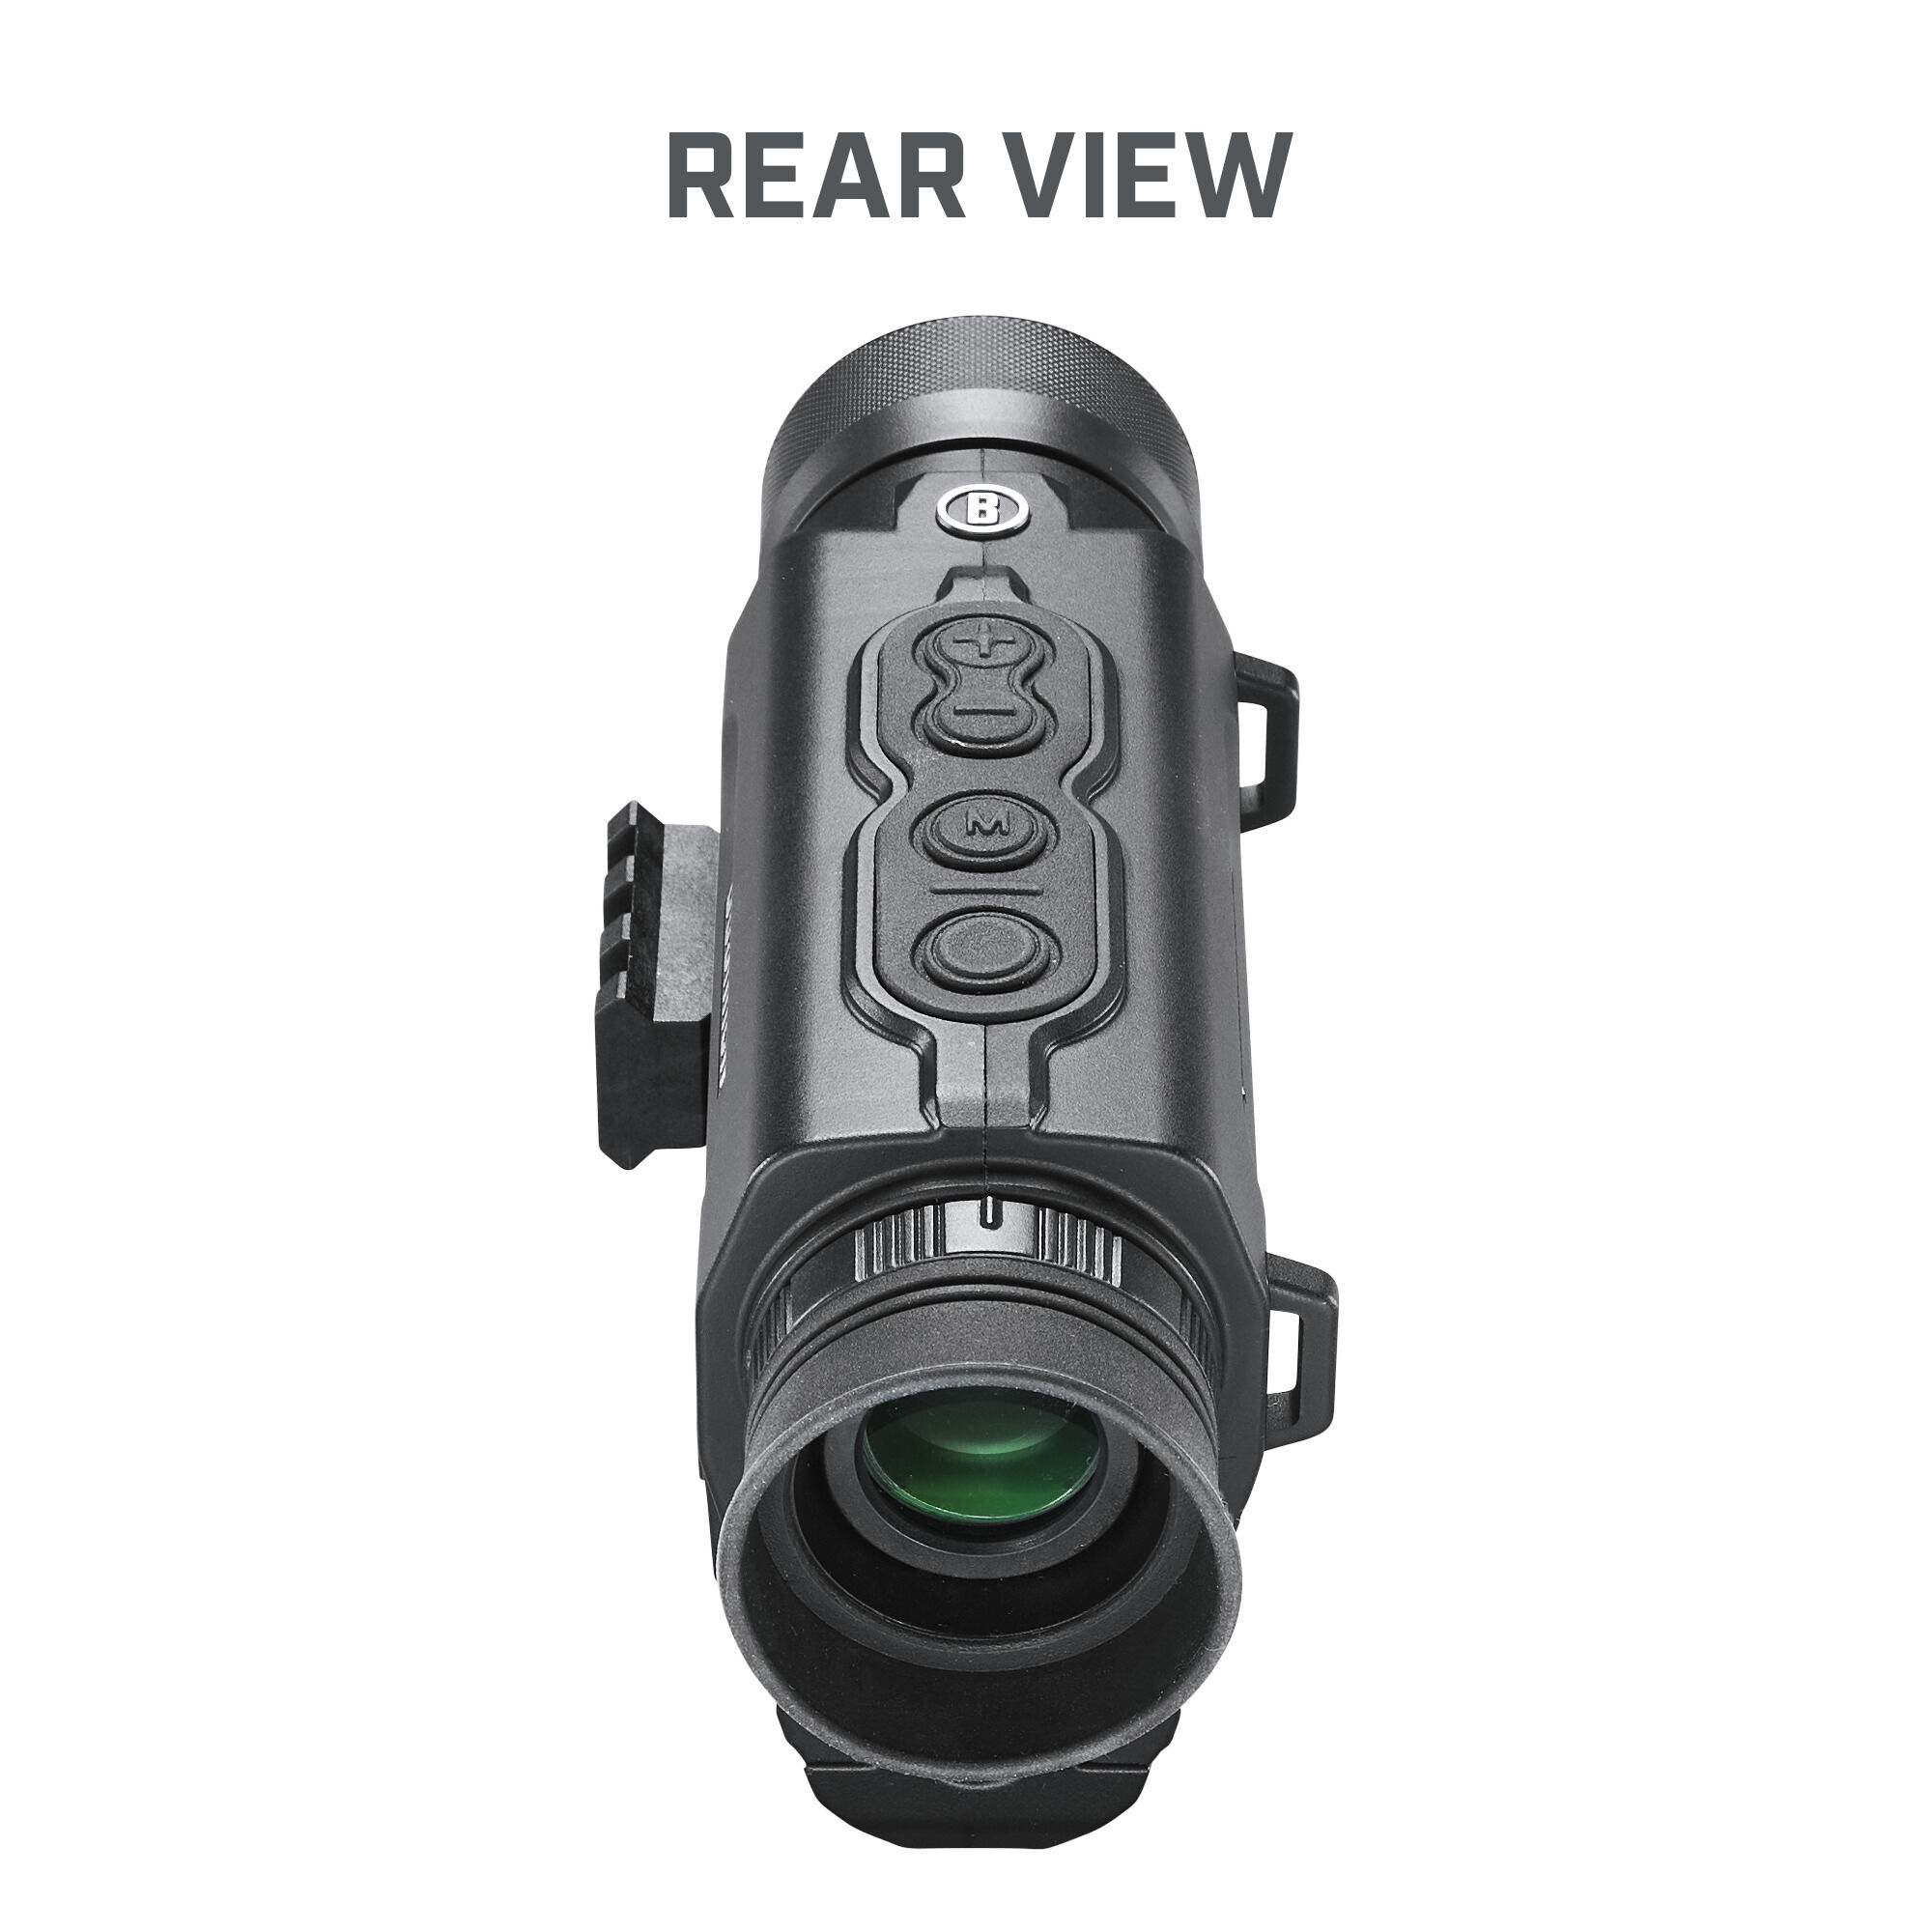 Buy Equinox X650 Digital Night Vision and More | Bushnell